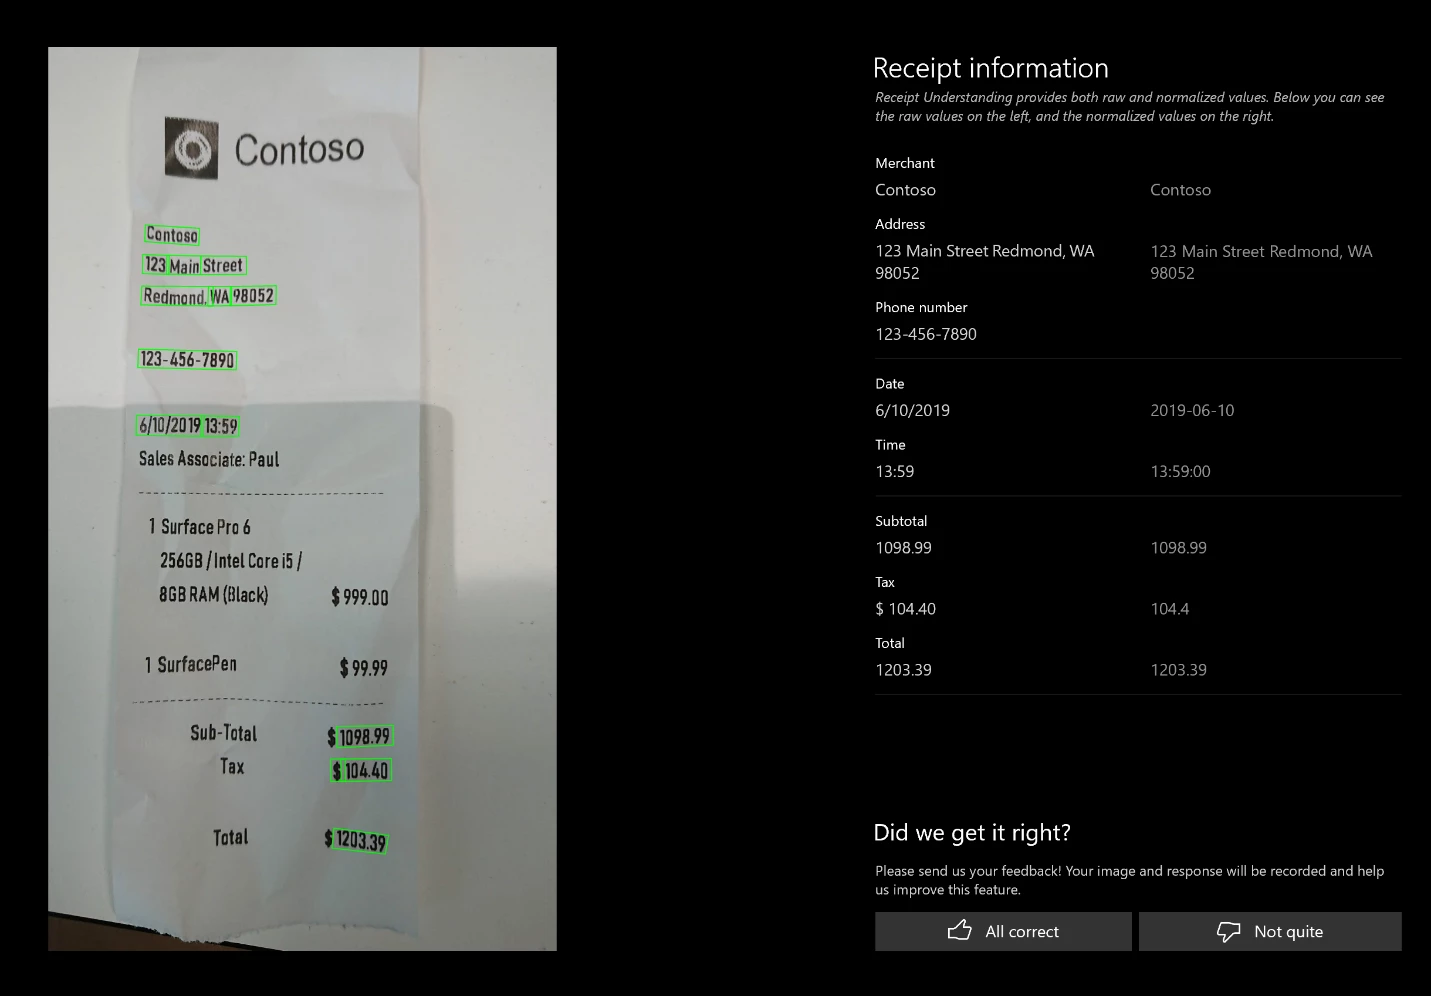 Sample receipt with extracted information from Form Recognizerâ€™s new prebuilt receipt feature